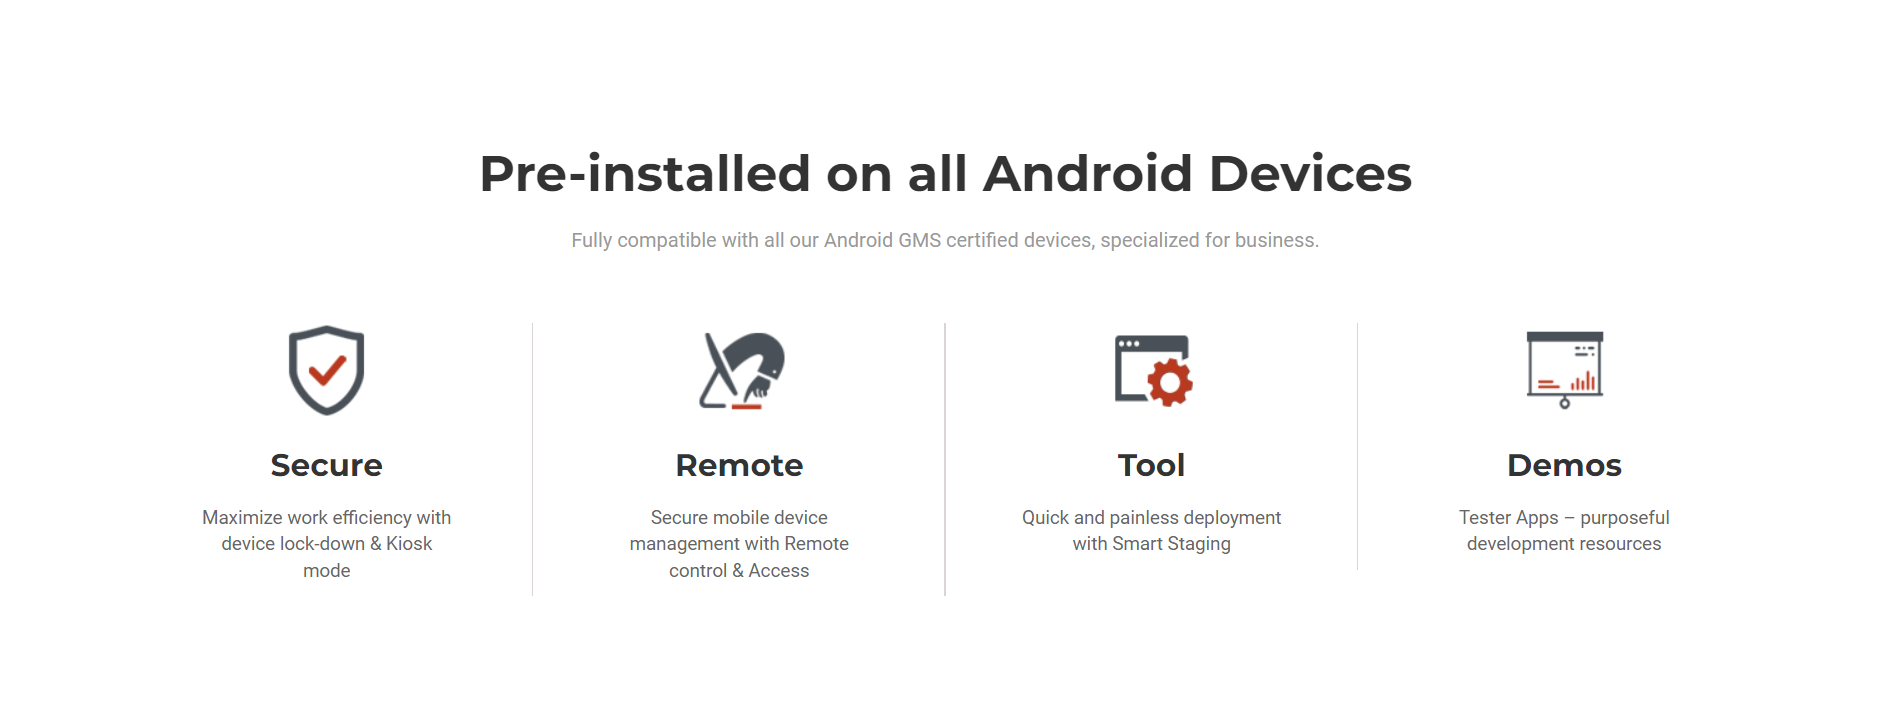 pre-installed-on-android-devices